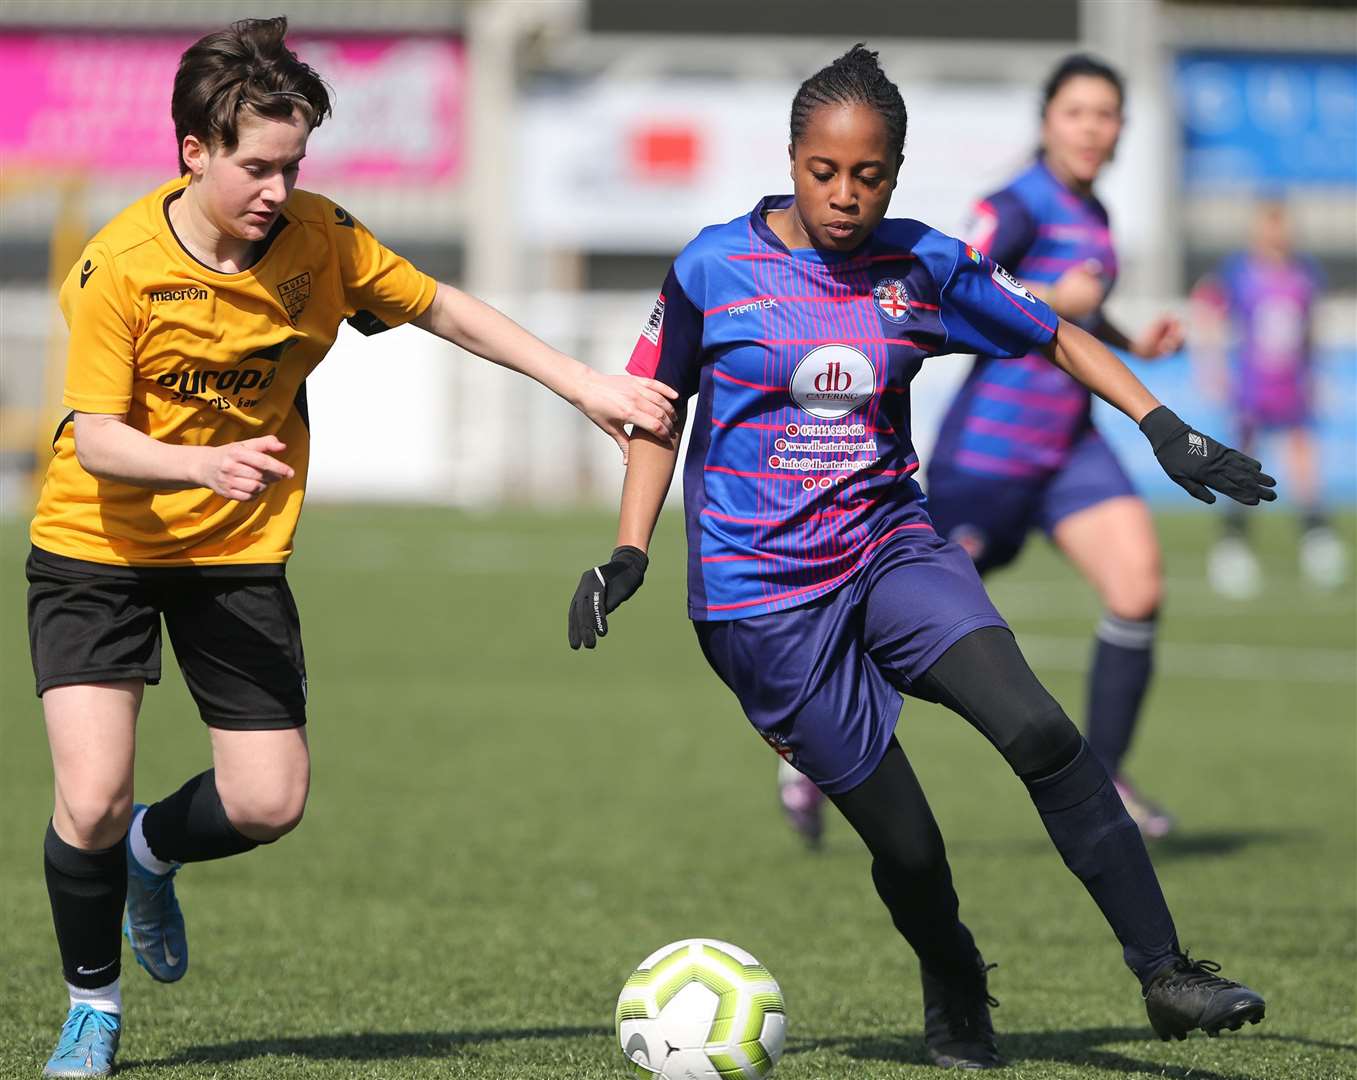 Danson Sports battle with Maidstone United (amber) in the Kent Merit Under-16 girls cup final. Picture: PSP Images